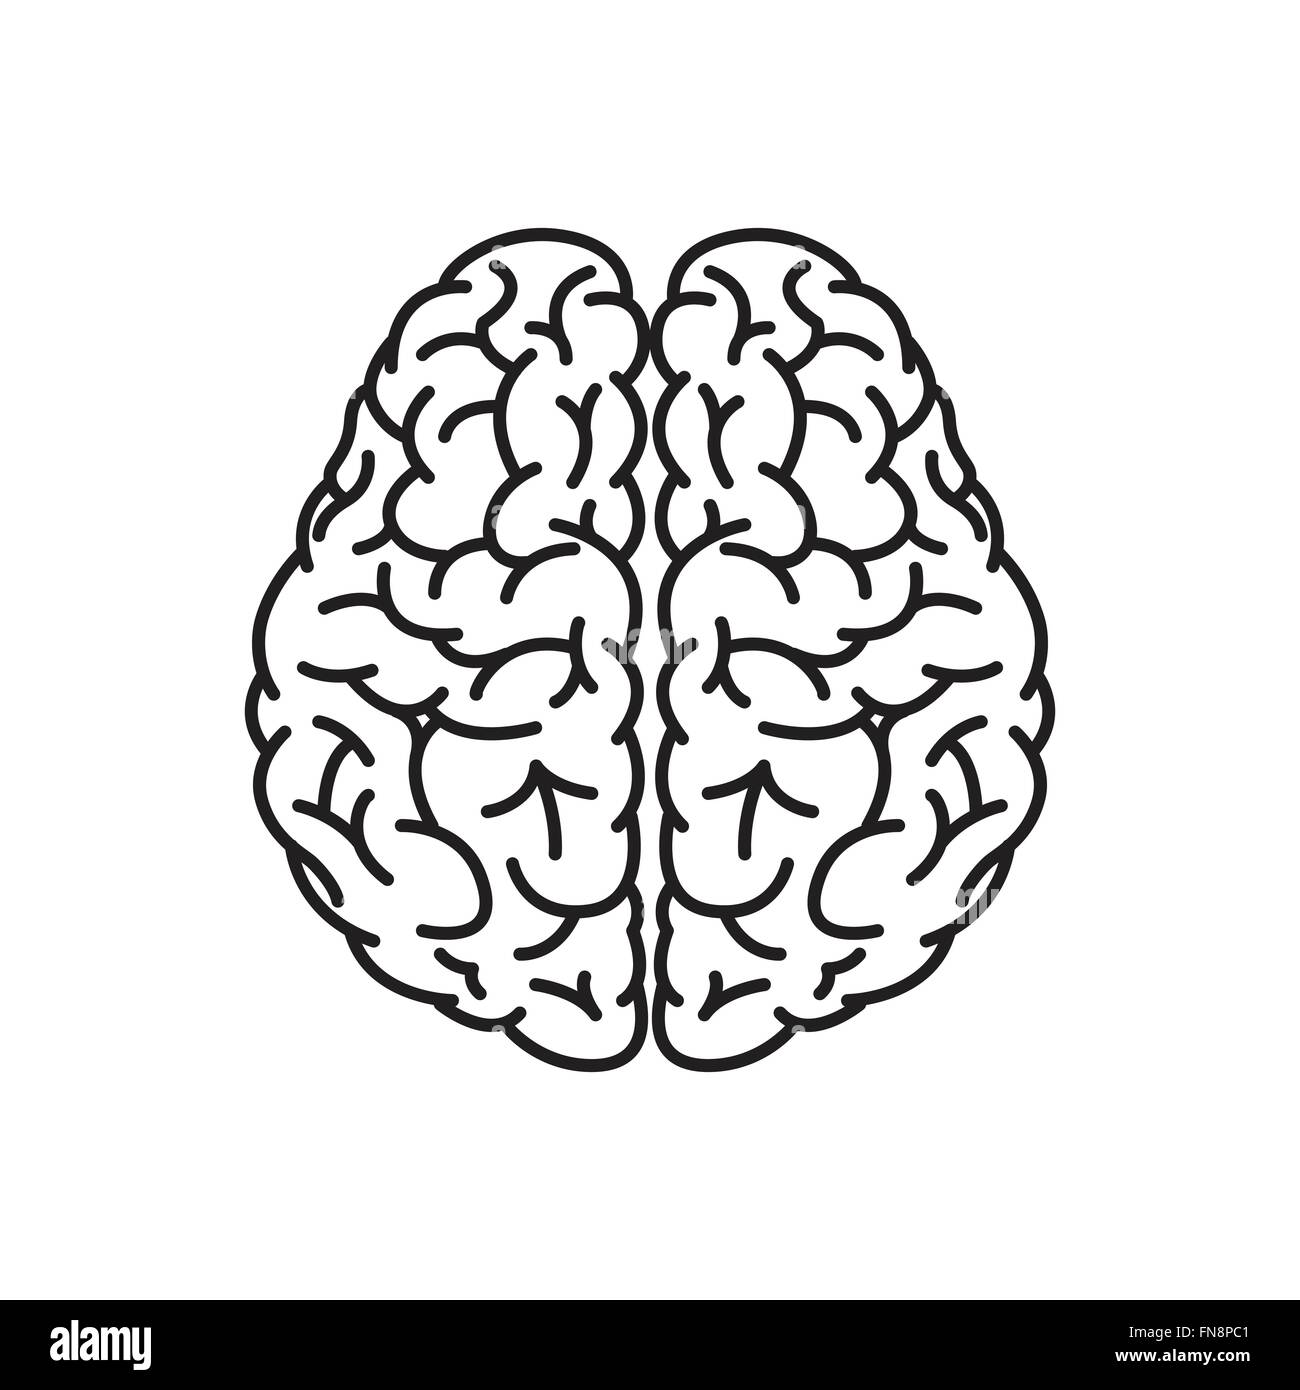 Vector Illustration of Human Brain Outline From Top View Stock Vector